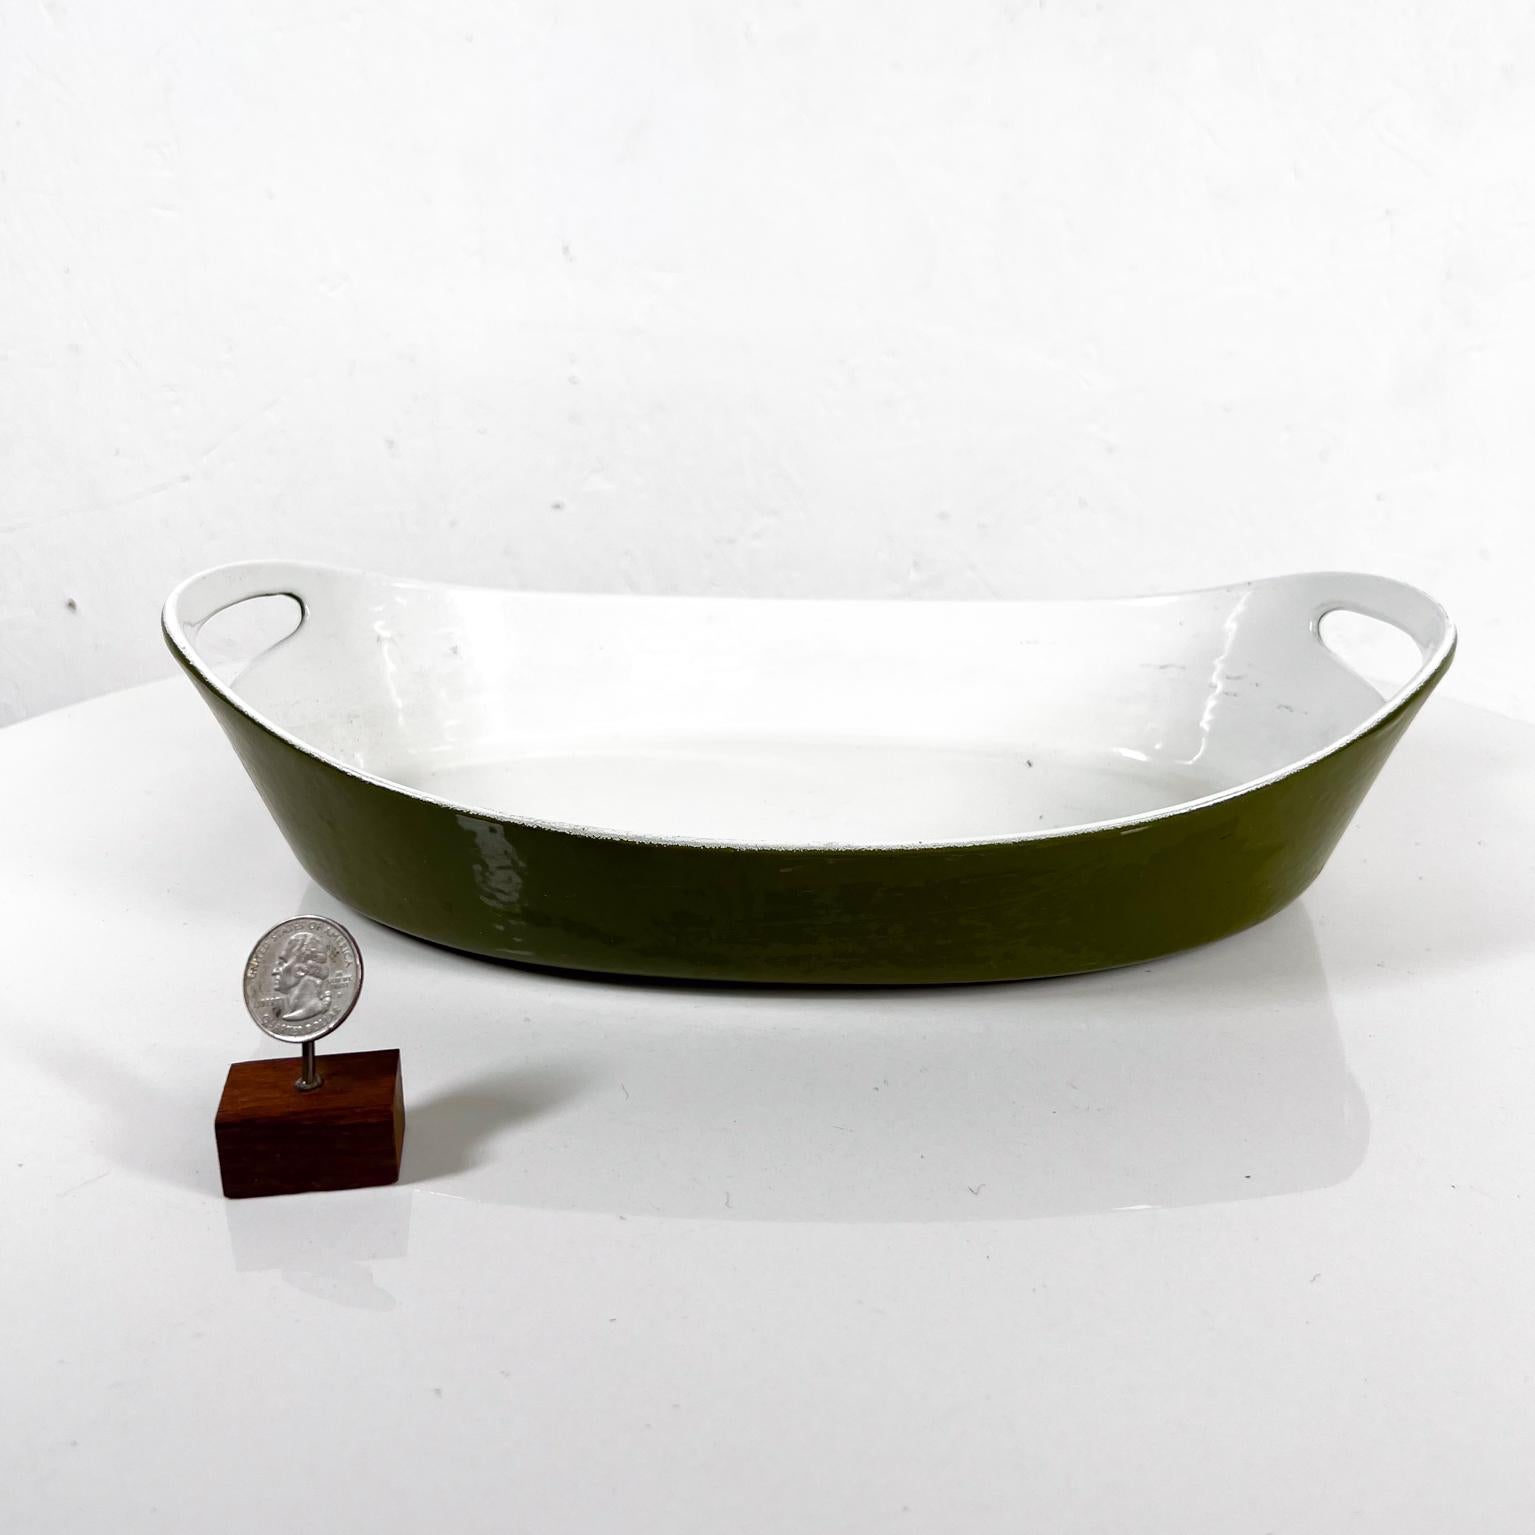 Copco Michael Lax Oval Casserole Green
Enamel Cast Iron Dish Pan
Stamped by maker Denmark.
12.88 w x 7.75 d x 3 h
Preowned vintage condition.
See all images please.